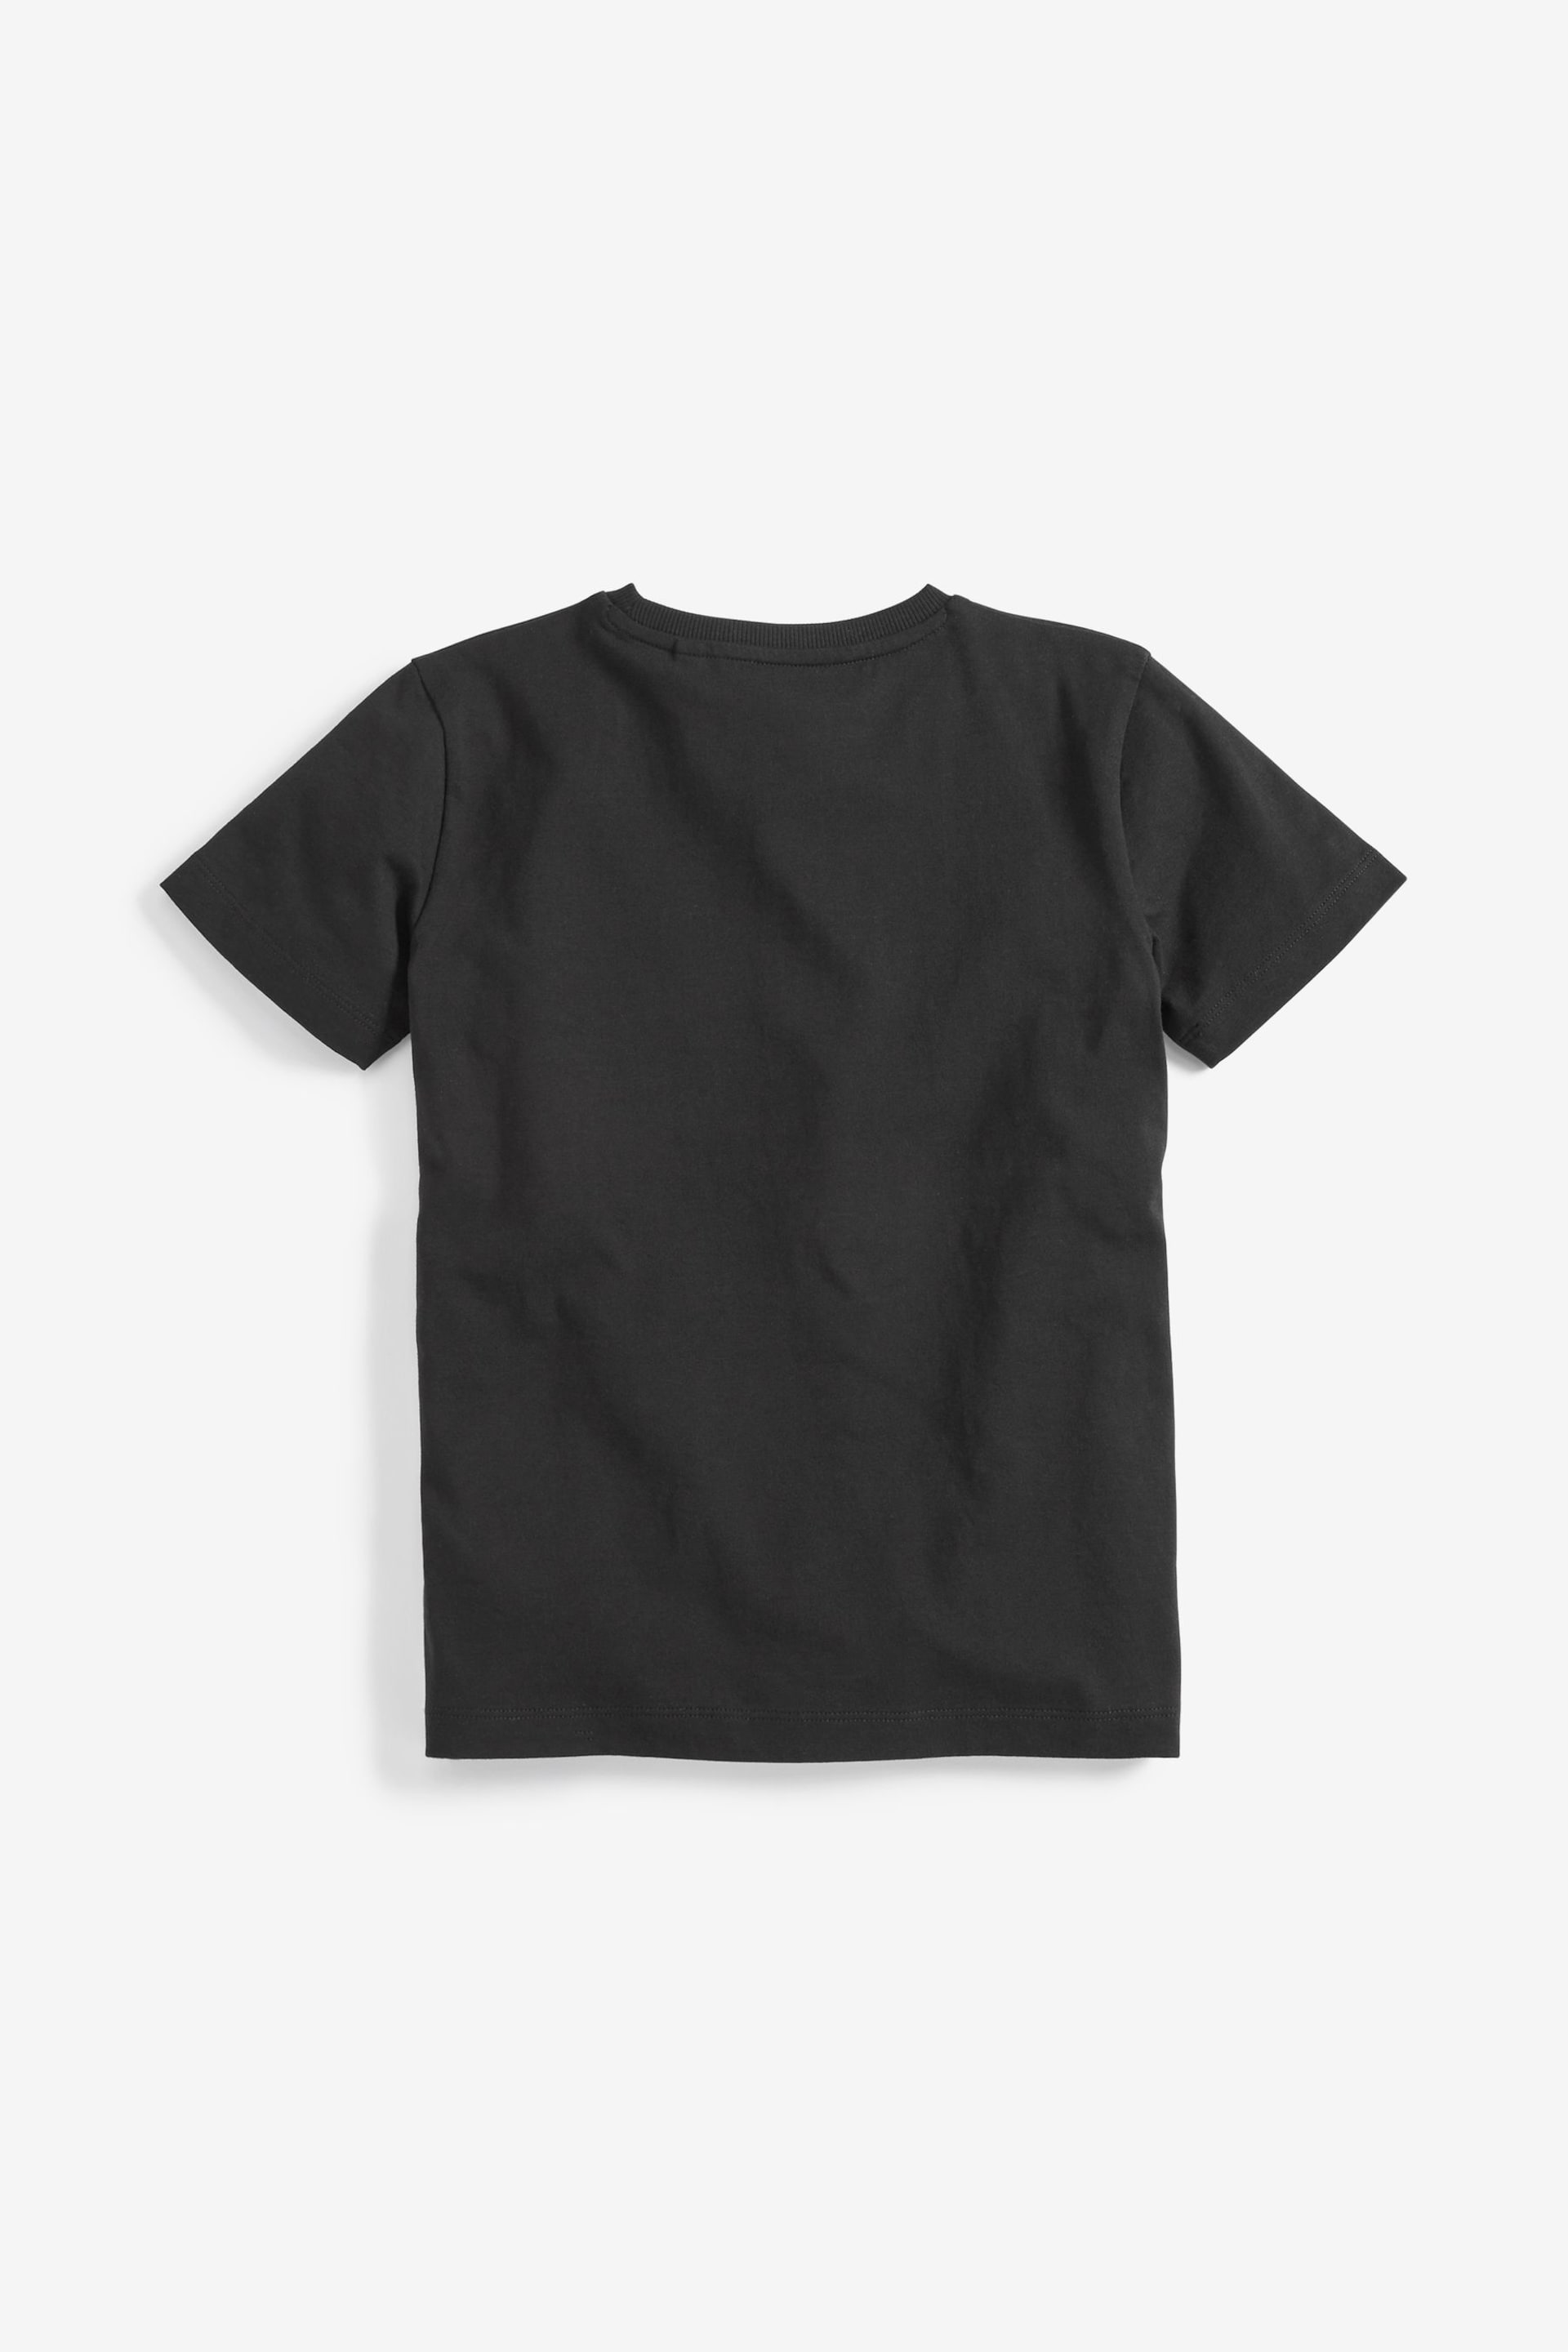 Black Short Sleeve Cotton T-Shirts 2 Pack (3-16yrs) - Image 3 of 4